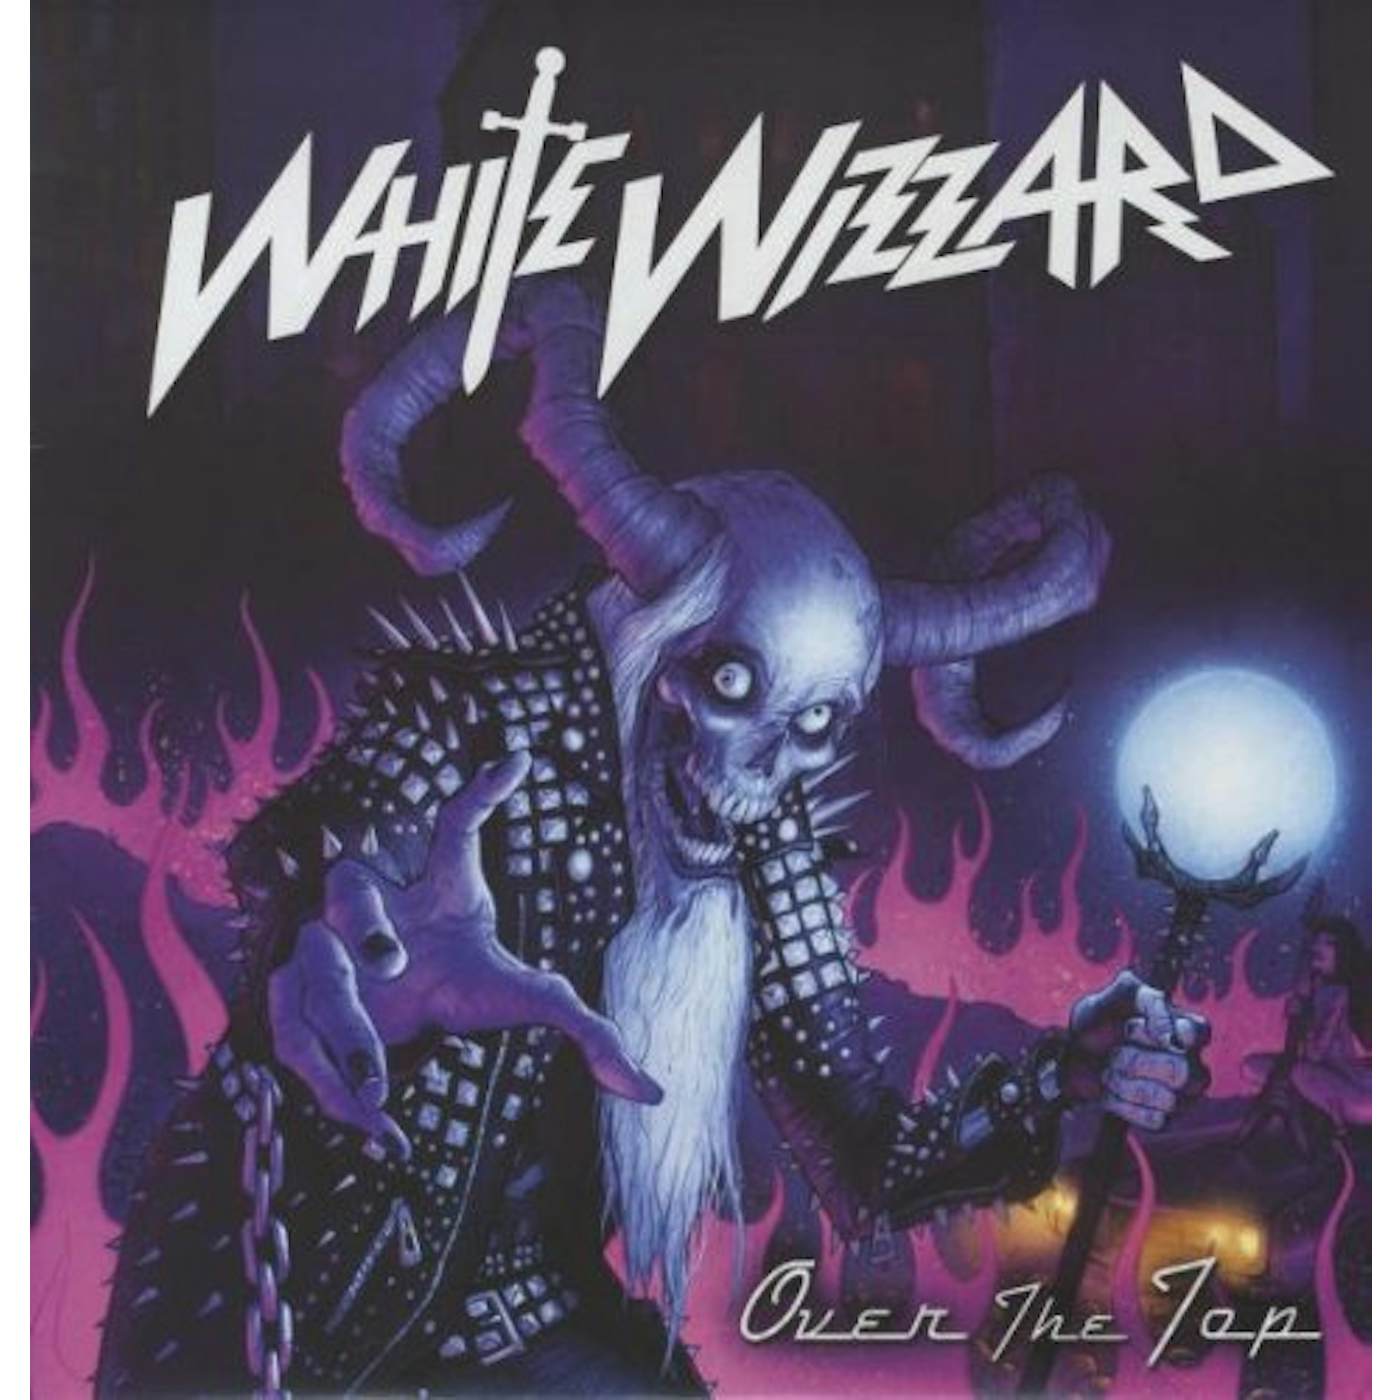 White Wizzard Over The Top Vinyl Record